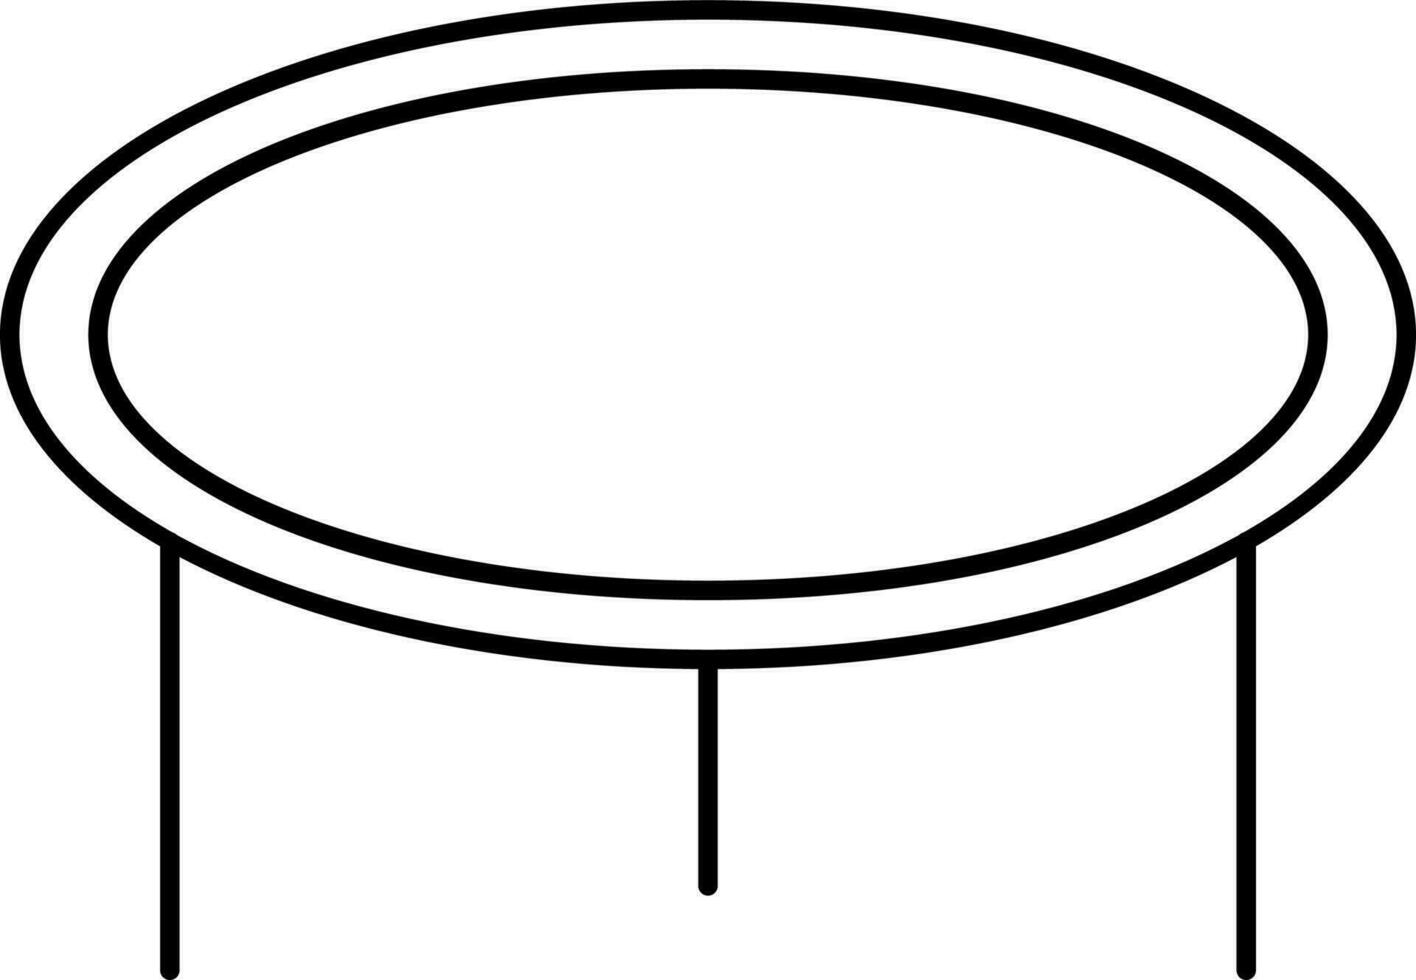 Isolated Trampoline Icon In Thin Line Art. vector